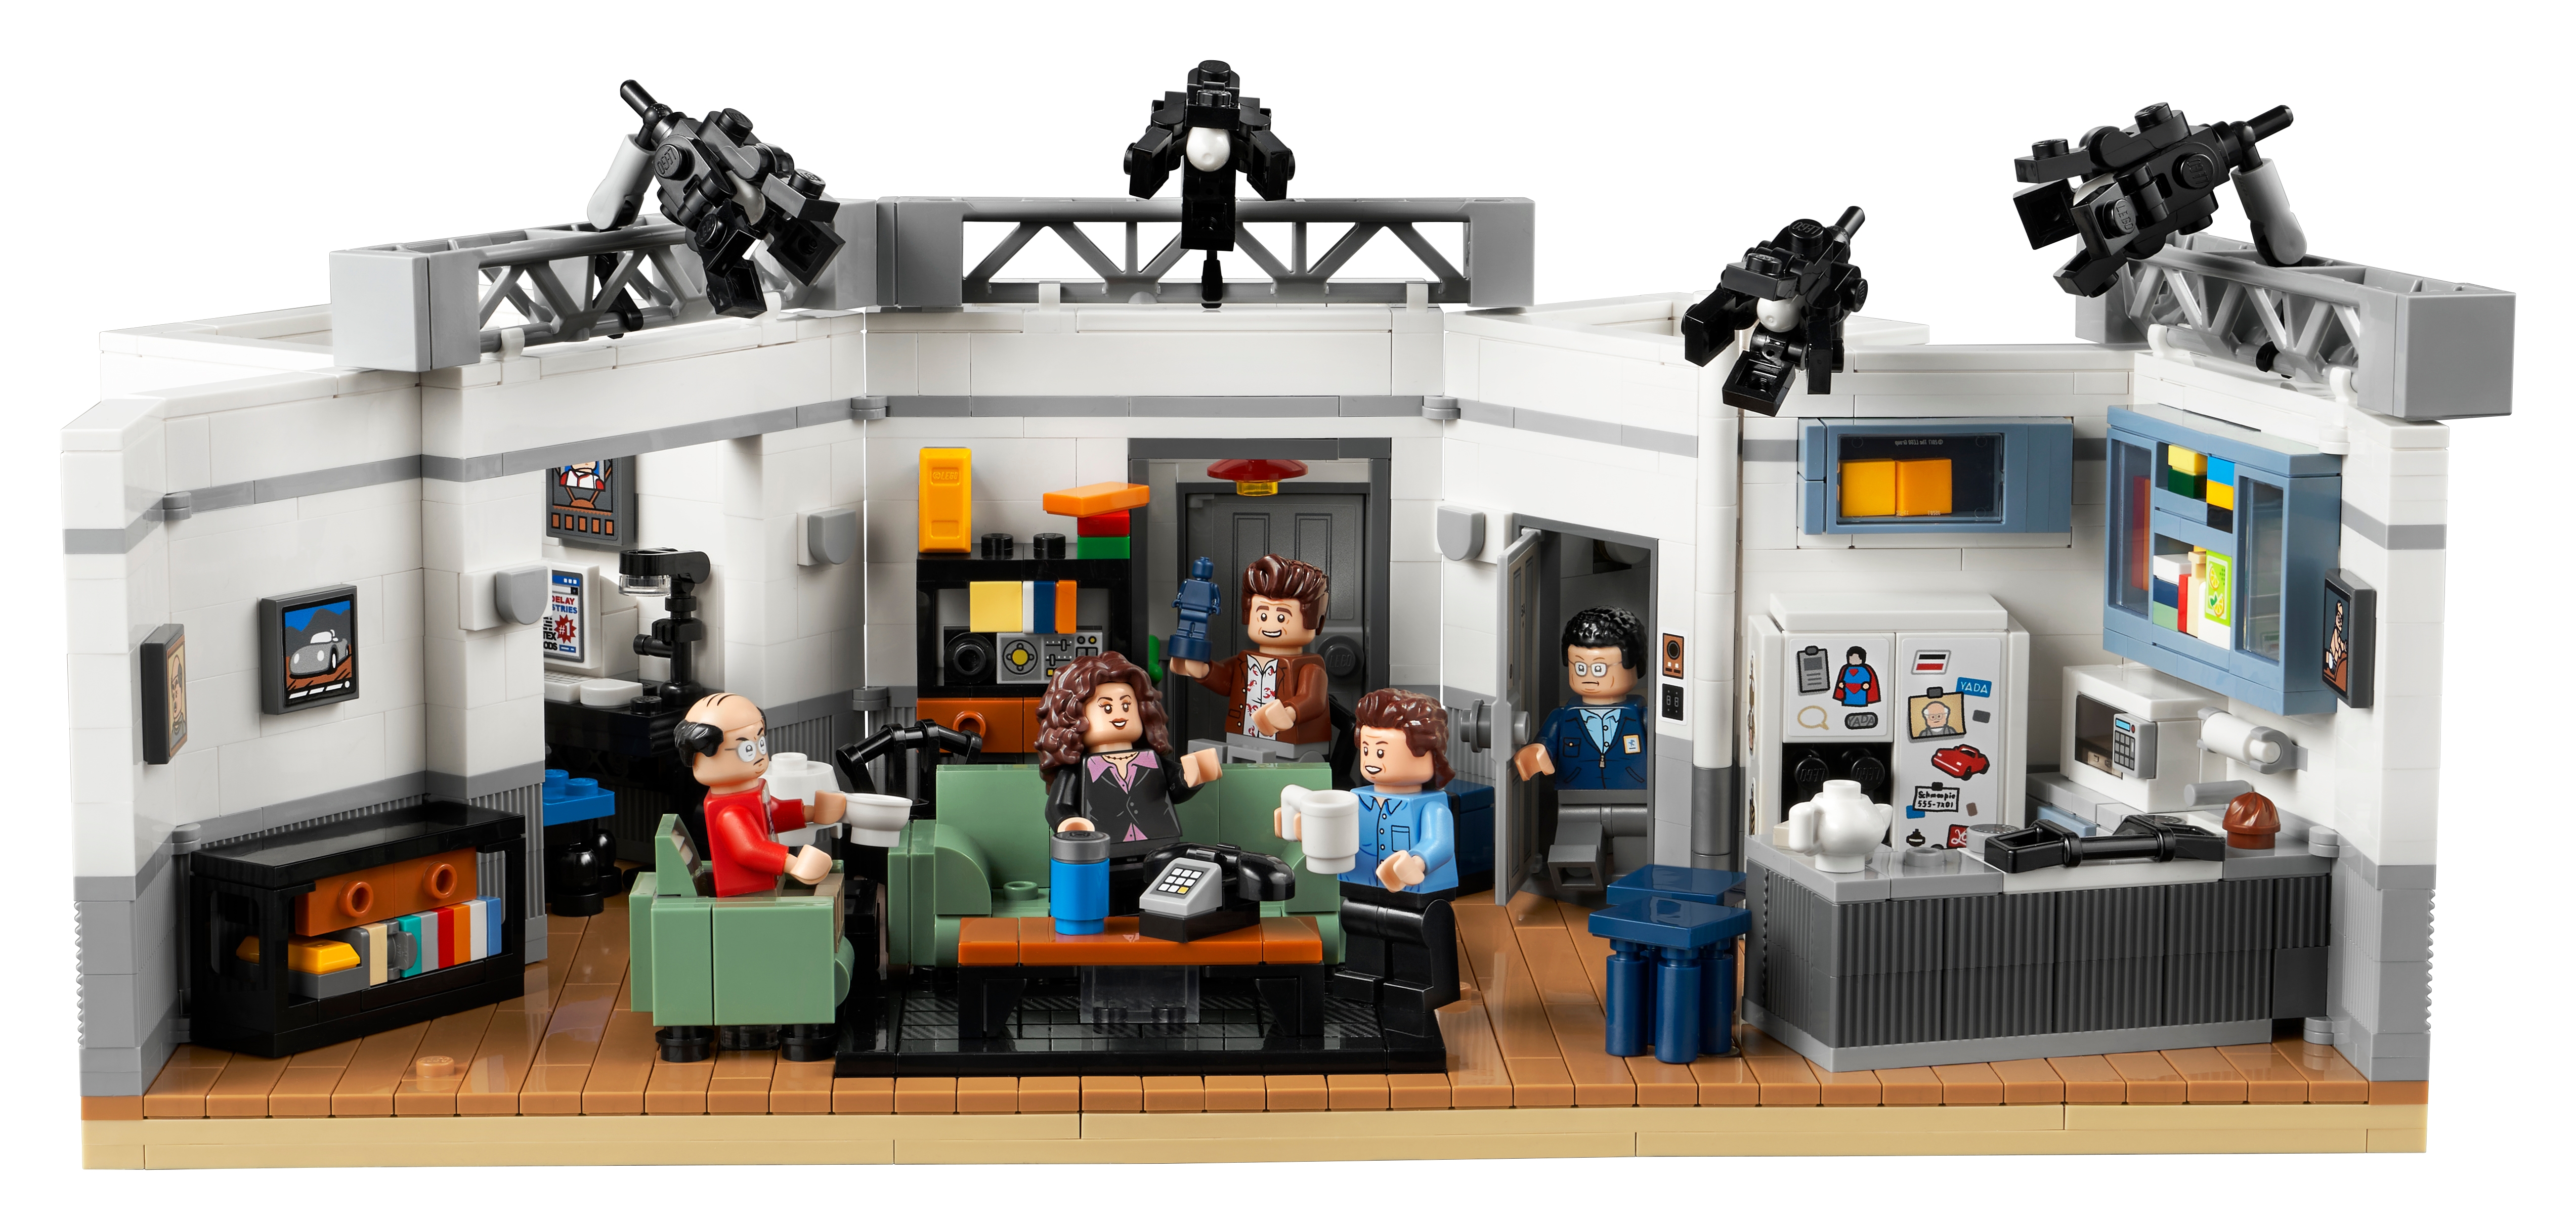 LEGO unveils 2,048-piece FRIENDS set recreating joey and monica's apartments